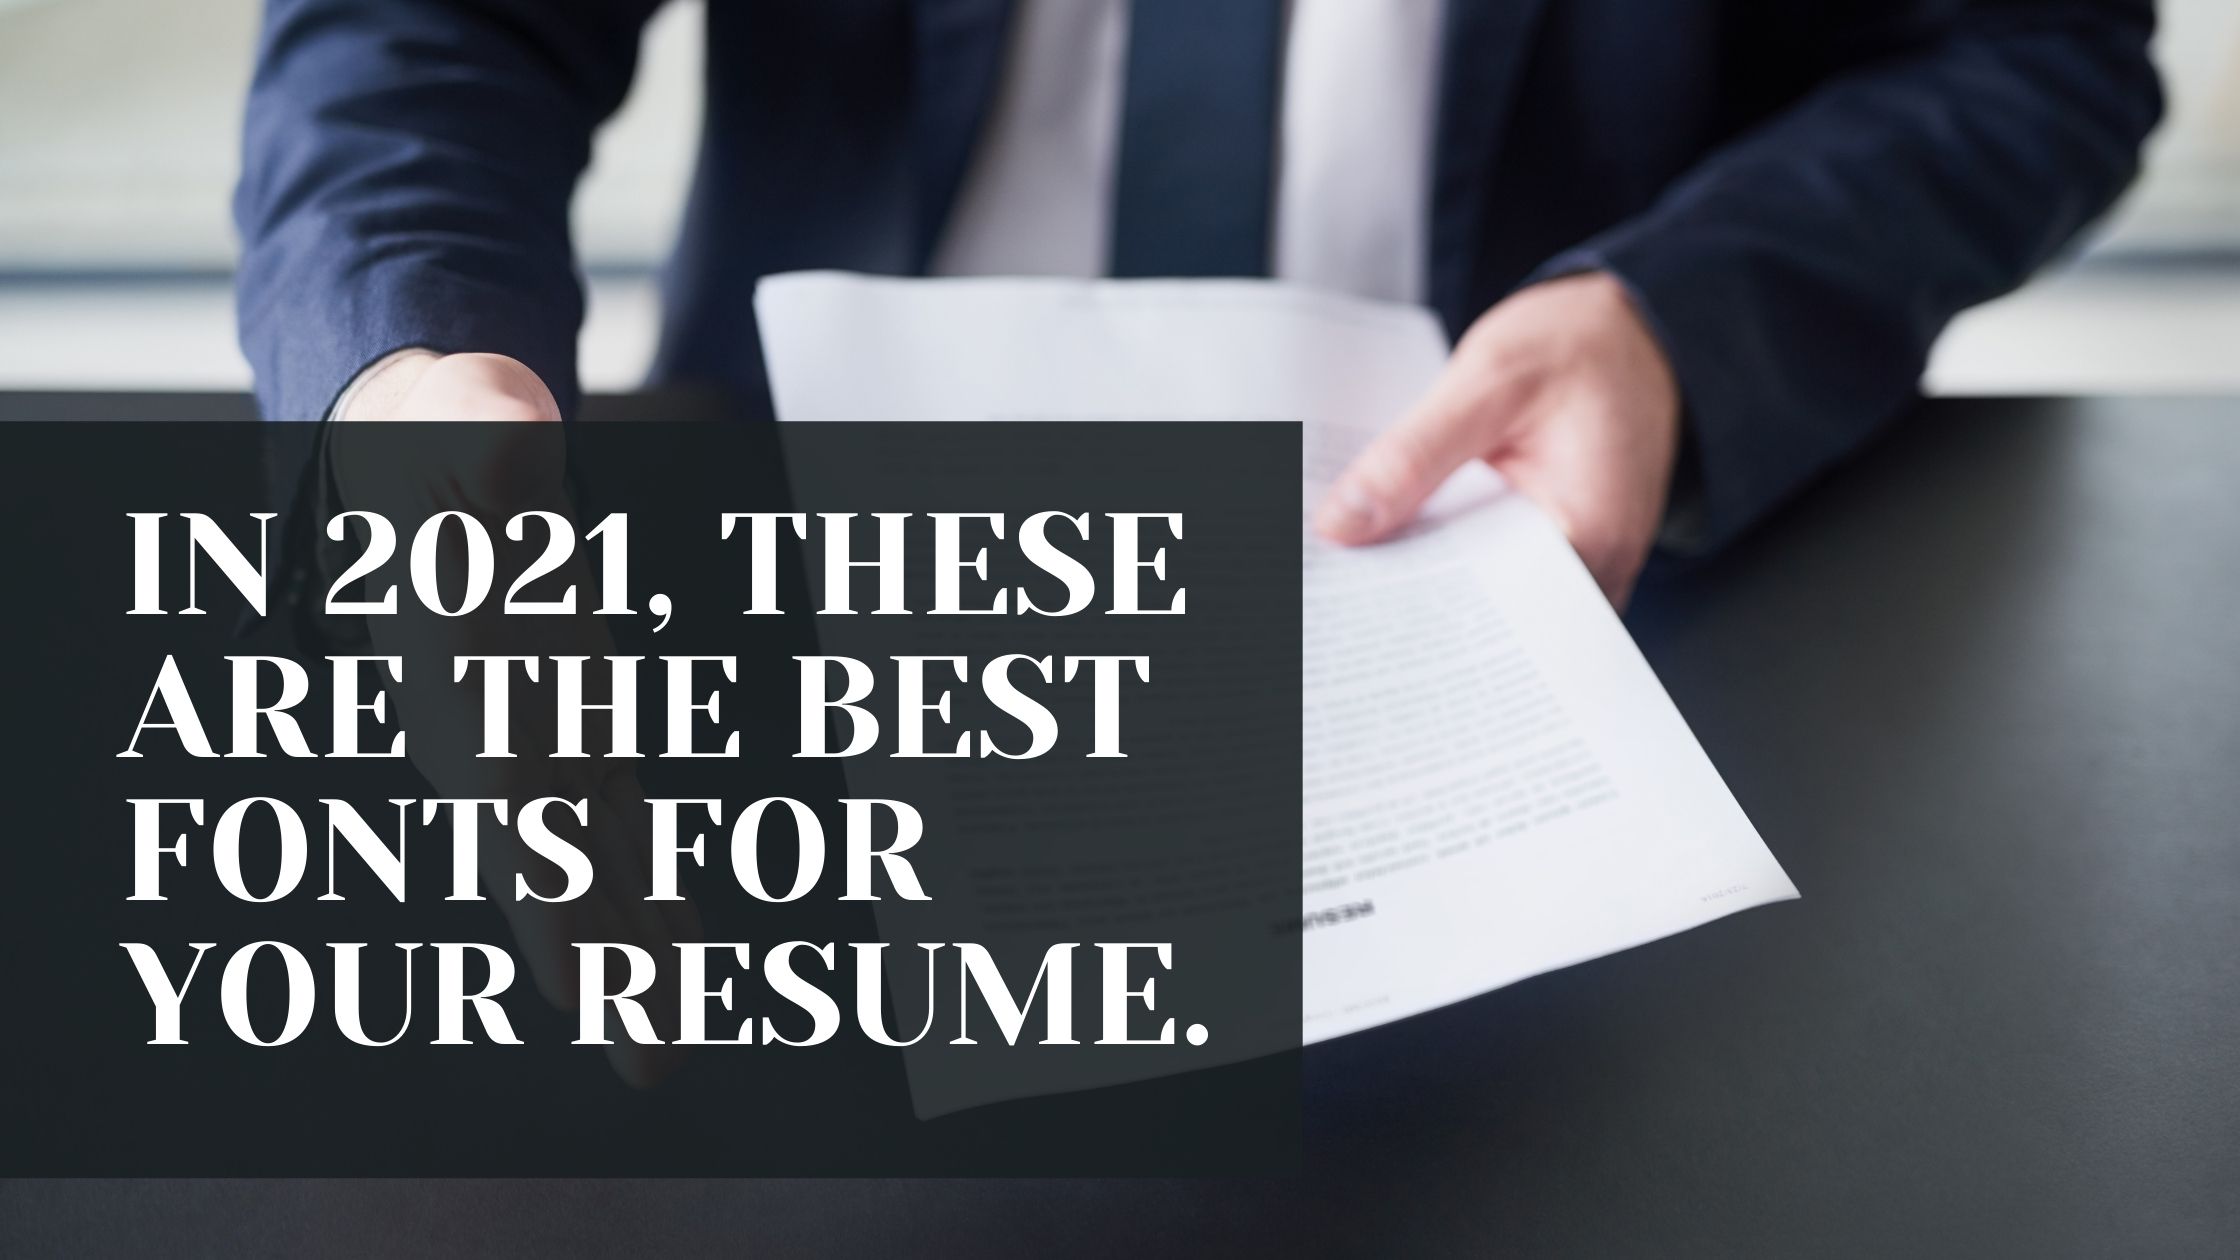 IN 2021, THESE ARE THE BEST FONTS FOR YOUR RESUME. - हर दिन कुछ नया सीखें।